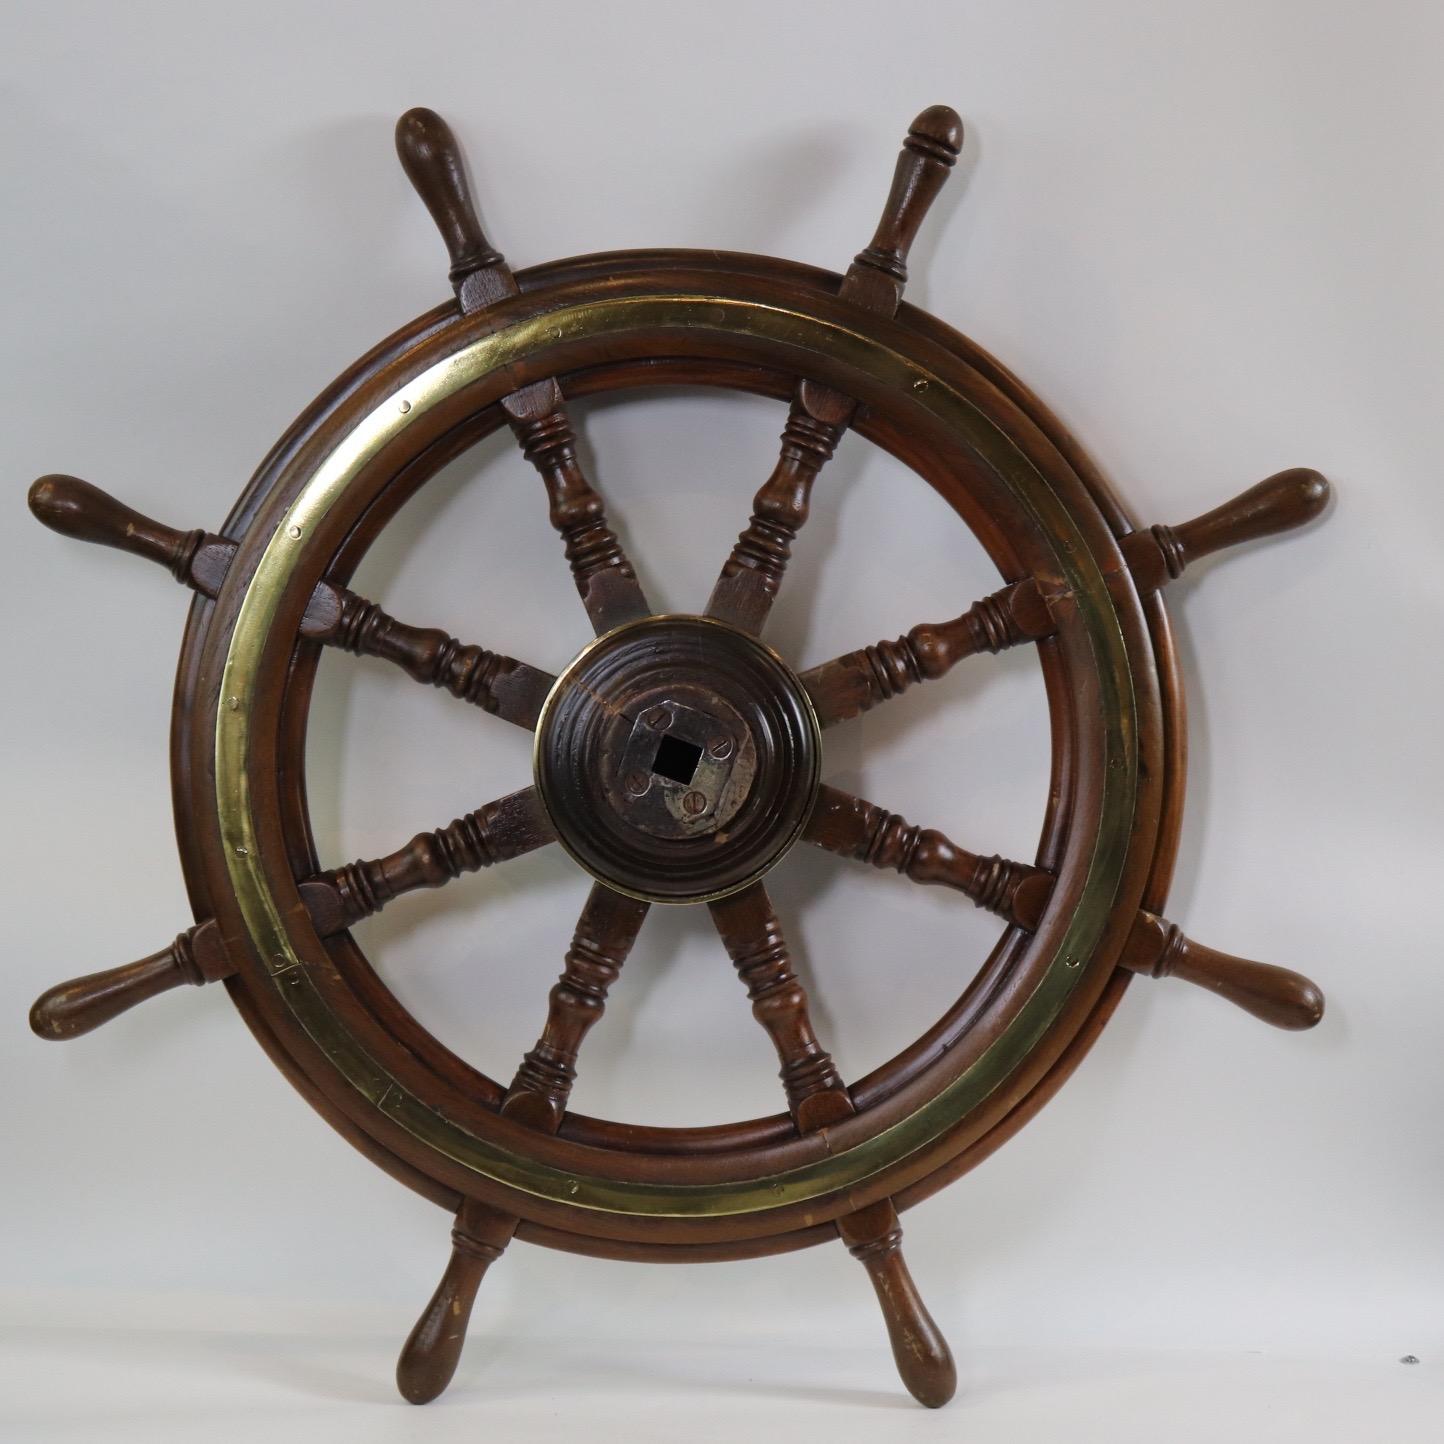 Mid-19th century ships wheel with iron and wood hub, eight turned spokes, inlaid brass trim ring and brass rings around the hub. Weight is 26 pounds. X-119